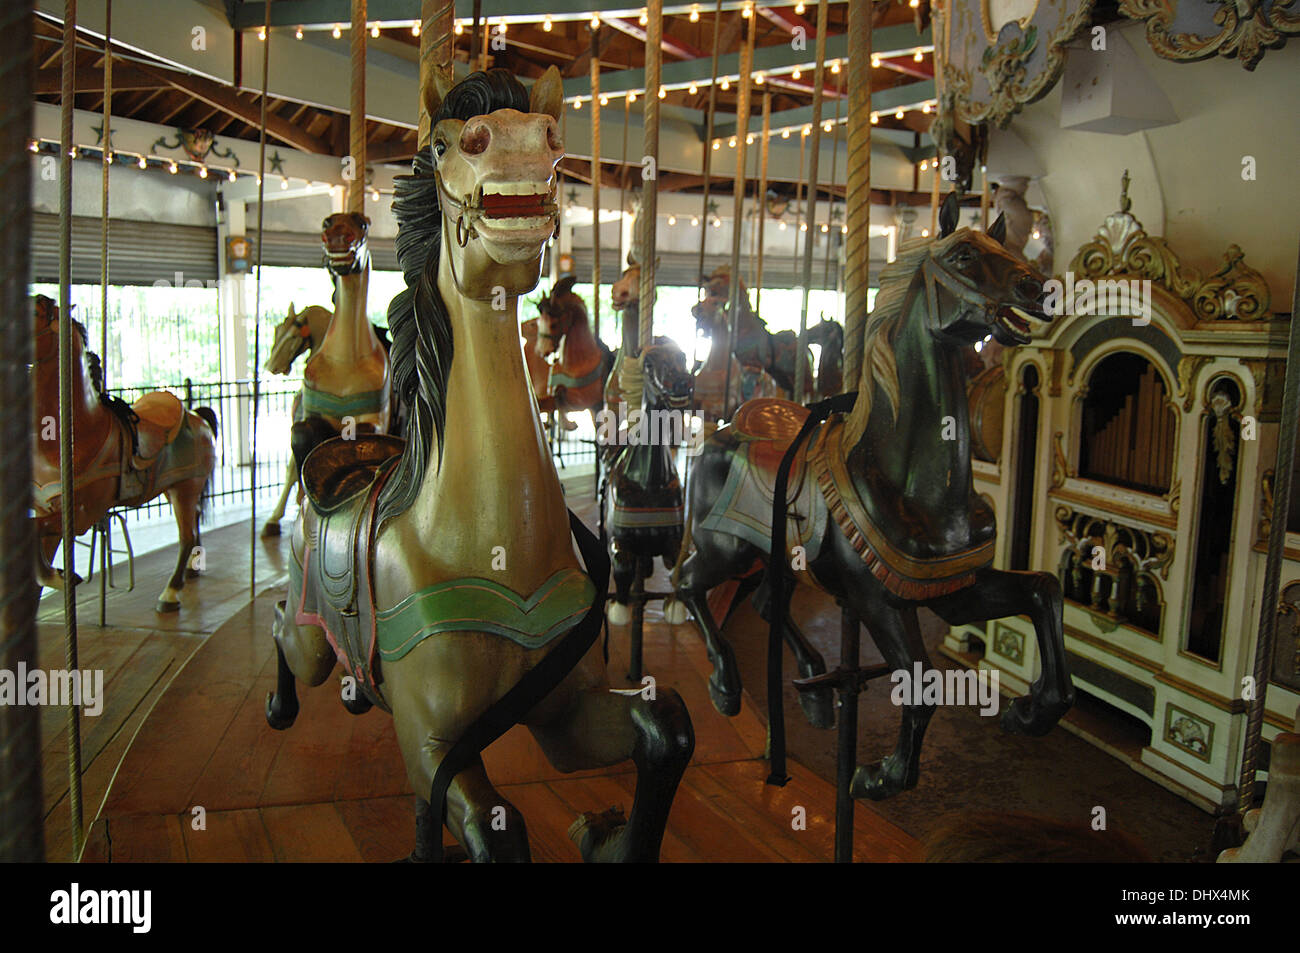 The Forest Park Carousel, a 1910 merry-go-round hidden away in the woods in Woodhaven, Queens, has now received NYC landmark status. The carousel, which features a colorful menagerie of 46 hand-carved horses, as well as a lion, tiger and deer, was unanimously declared a landmark by the Landmarks Preservation Commission on Tuesday (260613).  Where: Queens, New York, United States Wh Stock Photo